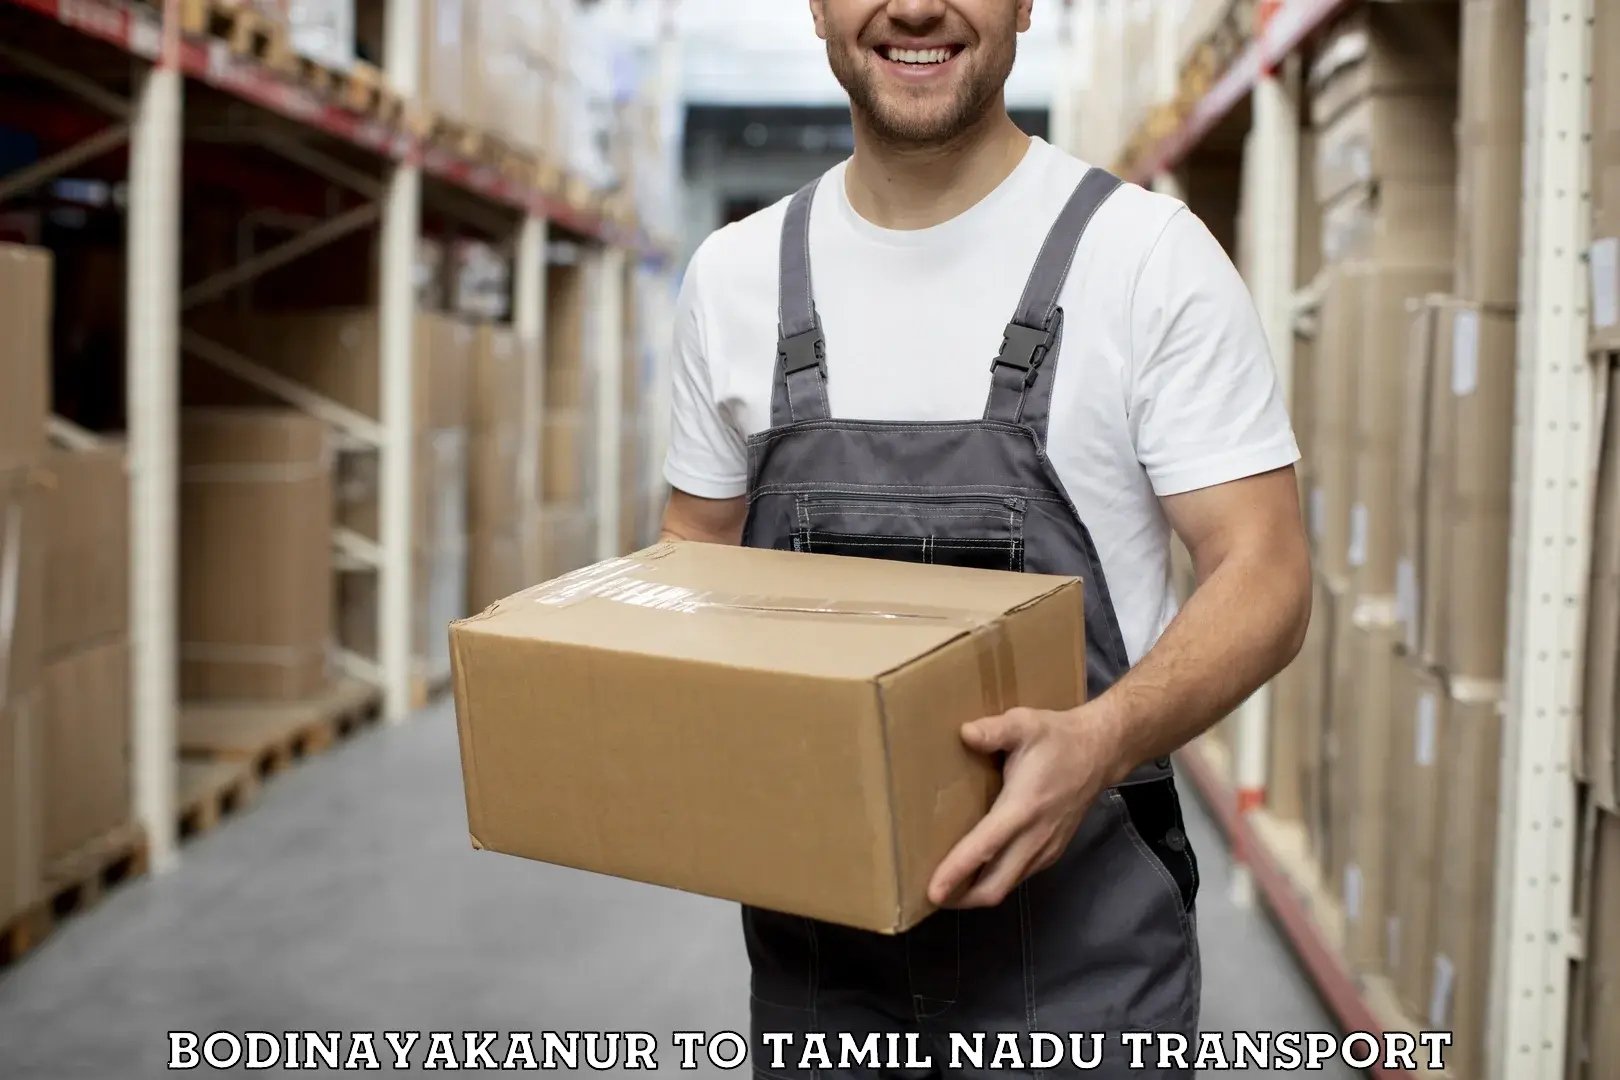 Furniture transport service Bodinayakanur to Meenakshi Academy of Higher Education and Research Chennai